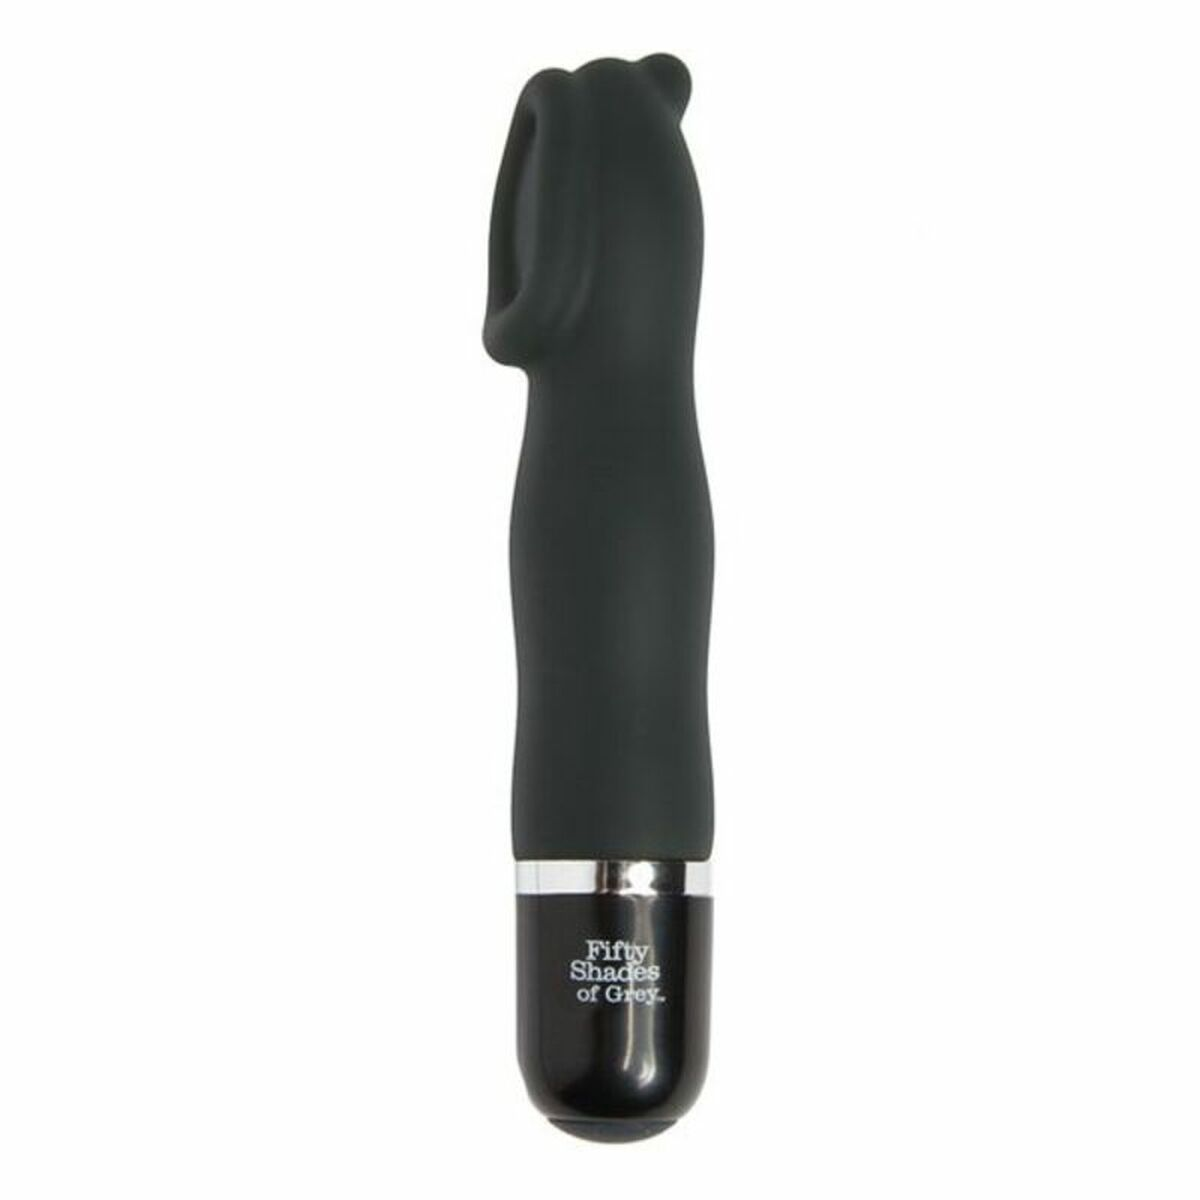 Vibrator GREY Touch SHADES FIFTY OF Sweet